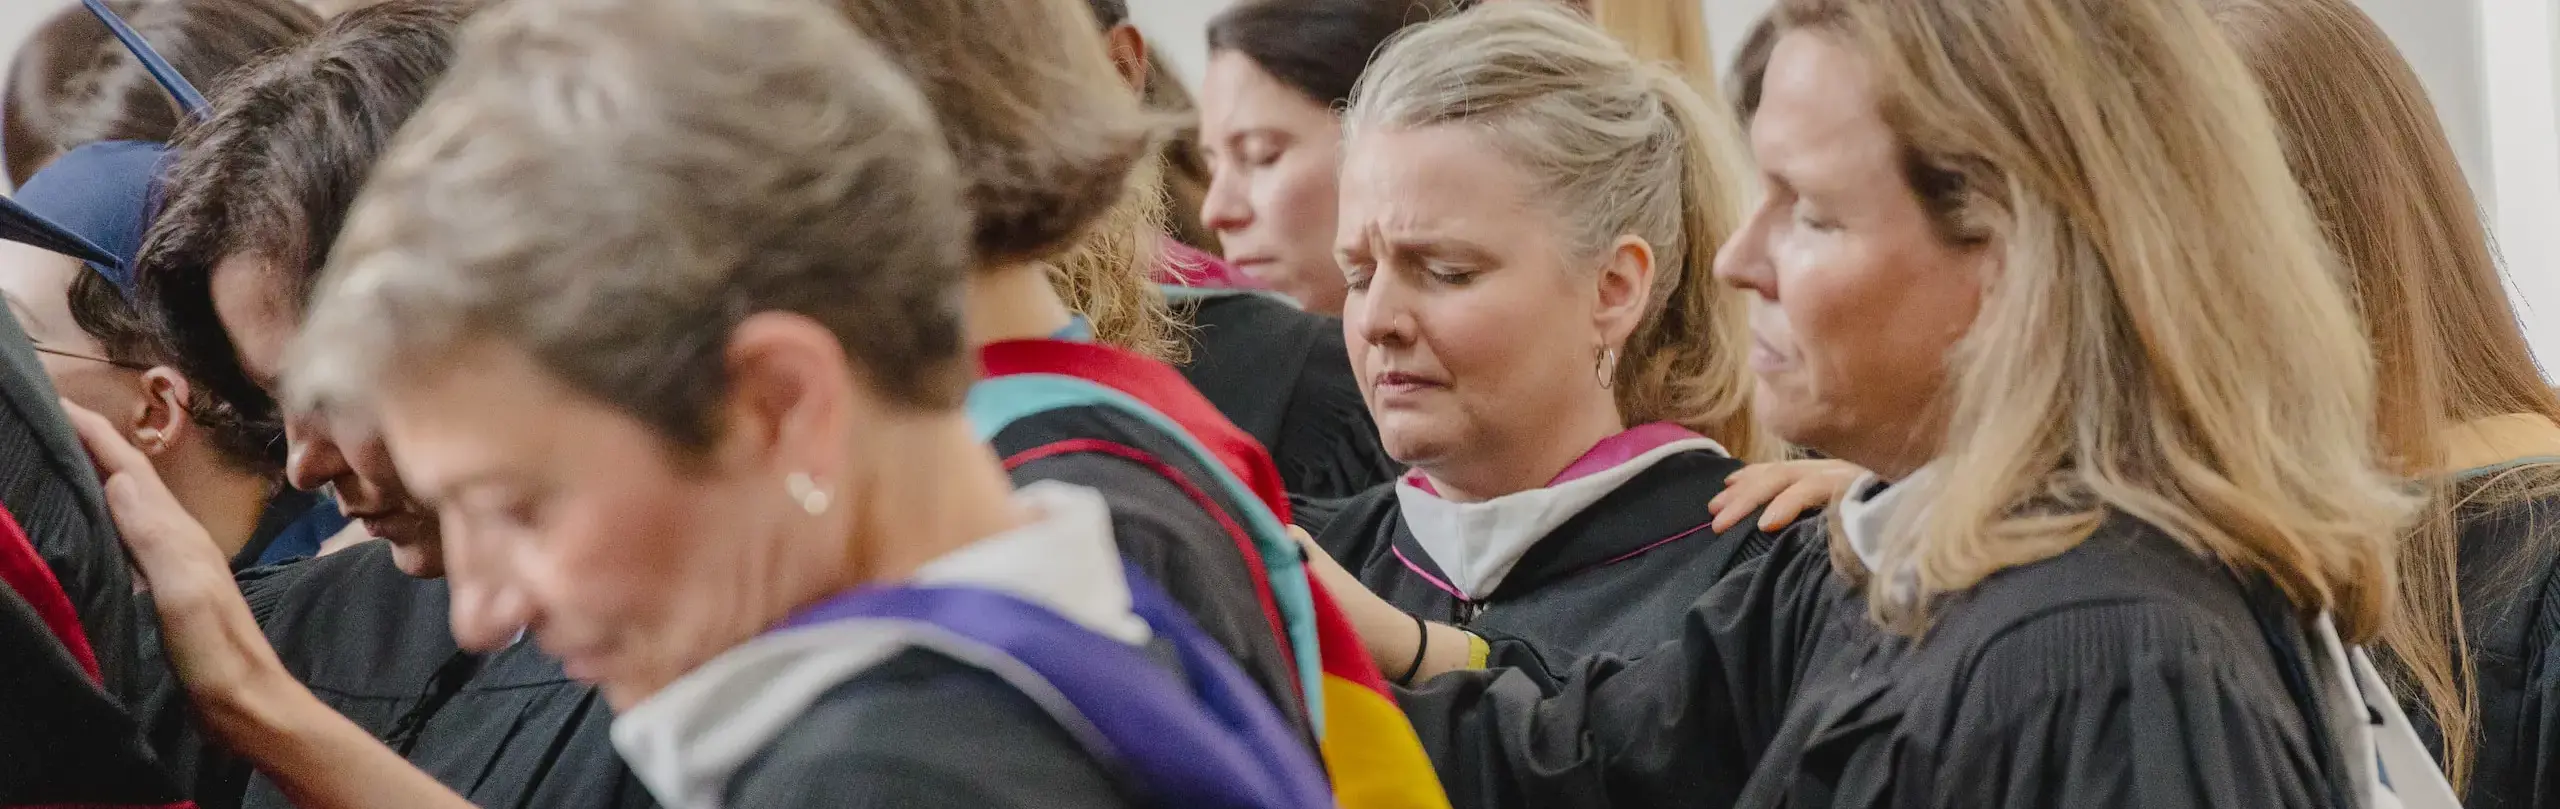 A group of female faculty members bow their heads in a solemn moment of prayer, wearing traditional black graduation gowns during a prayer ceremony for seniors about the graduate.